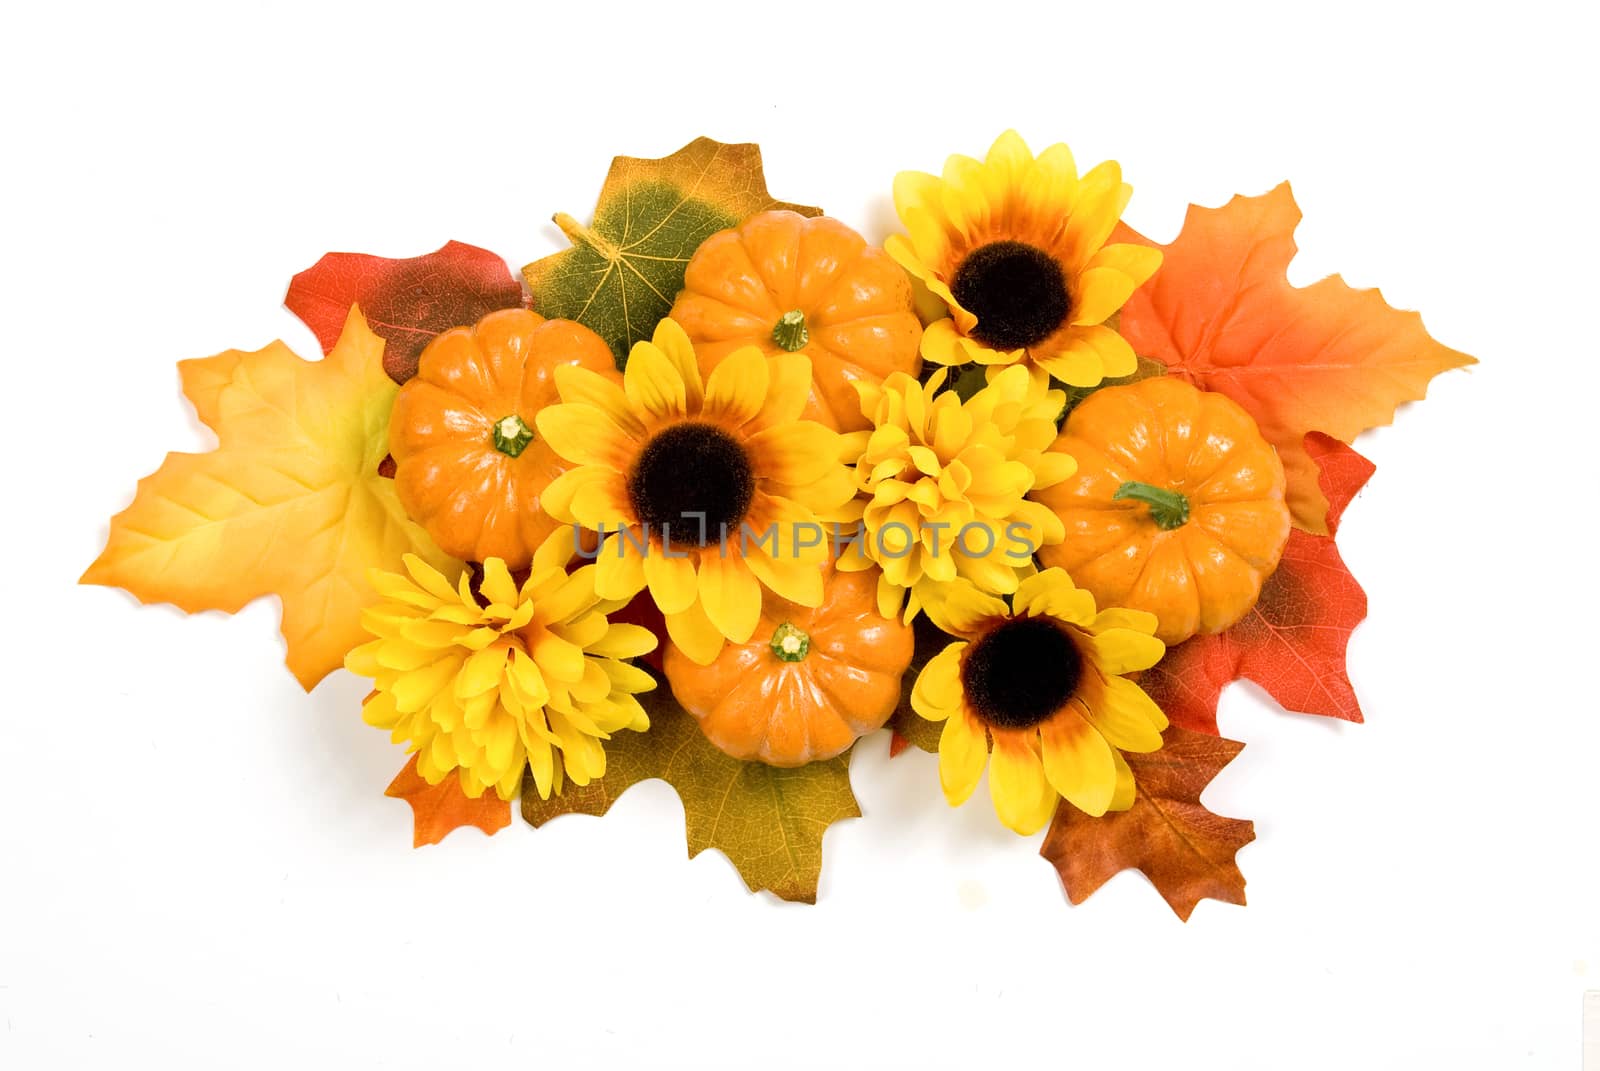 Beautiful brightly colored yellows, oranges, and greens included in this Autumn Centerpiece with little pumpkins on a white background